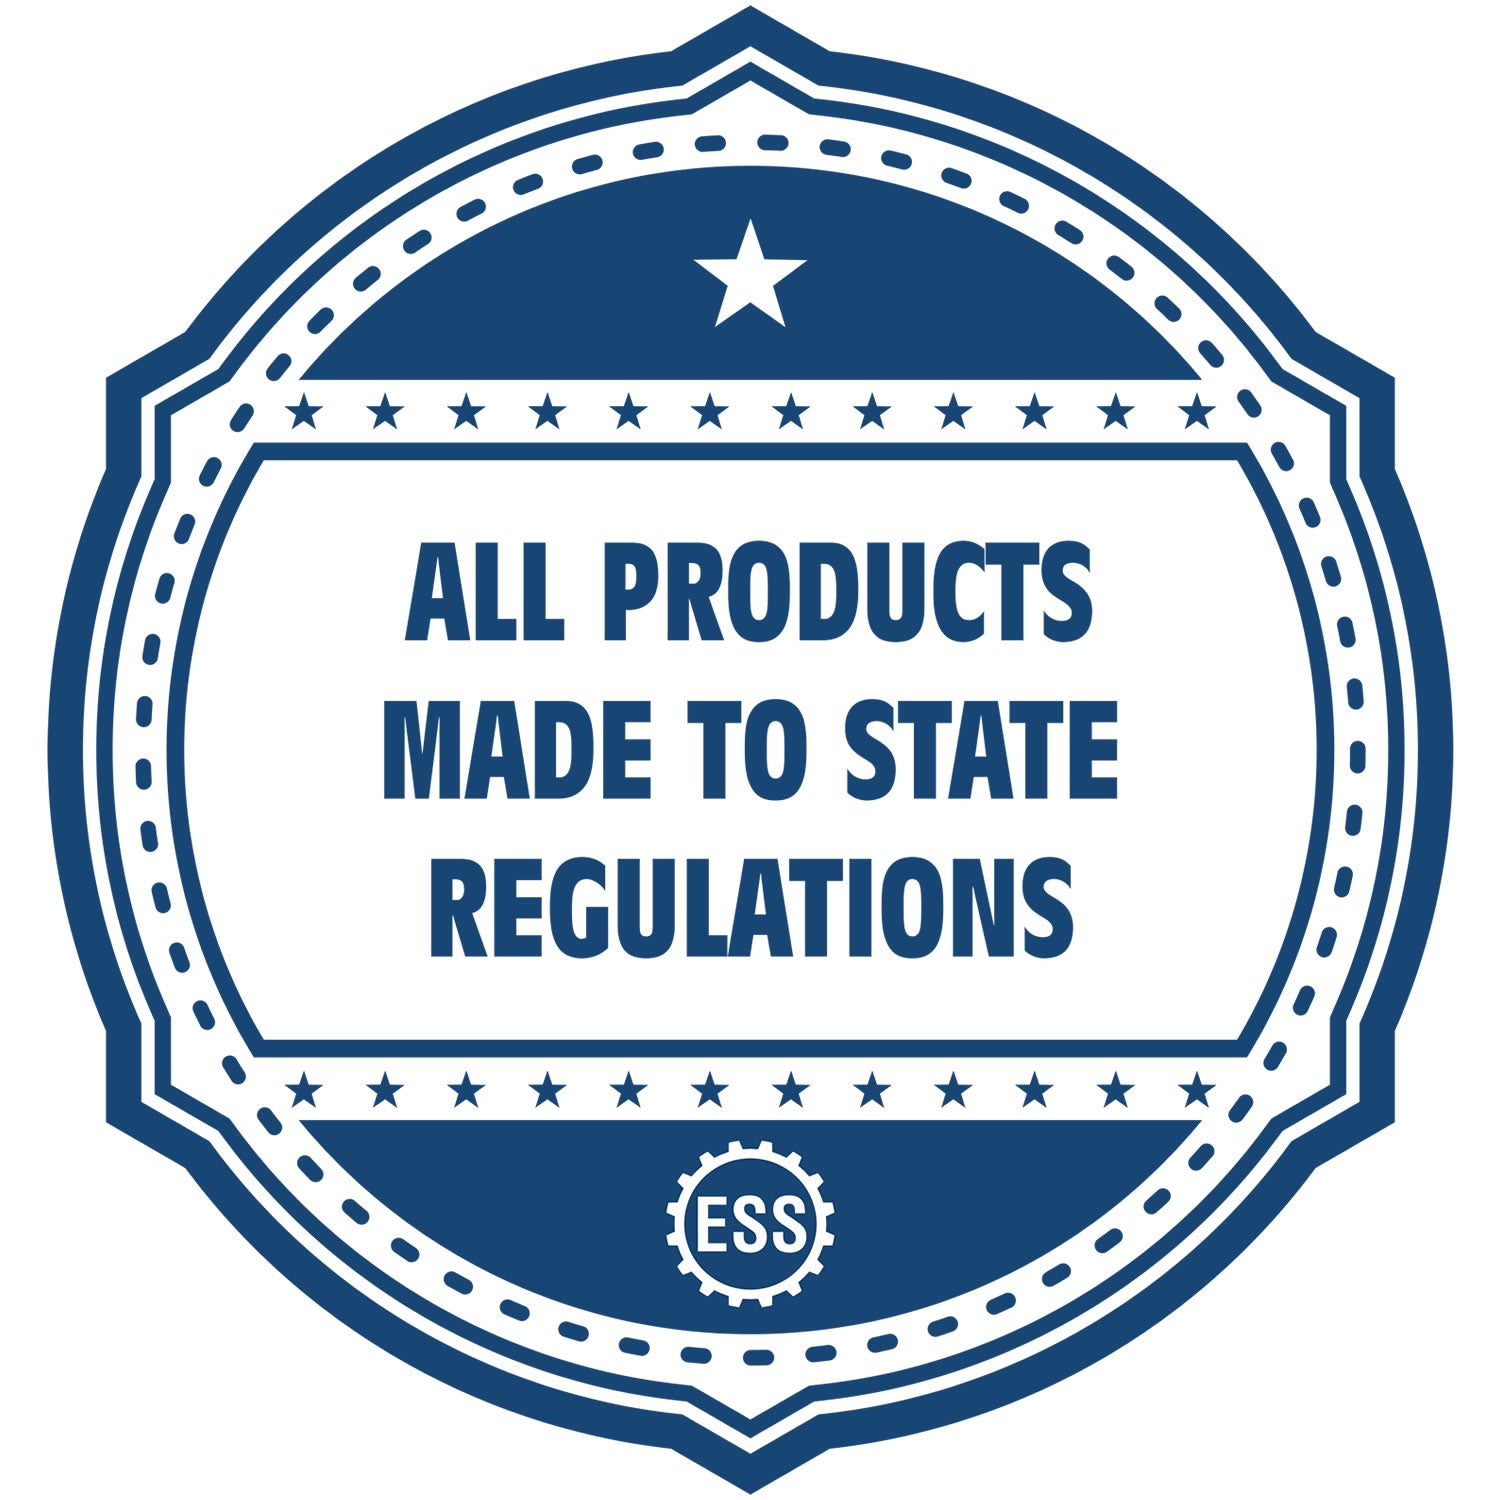 An icon or badge element for the Heavy-Duty Nevada Rectangular Notary Stamp showing that this product is made in compliance with state regulations.